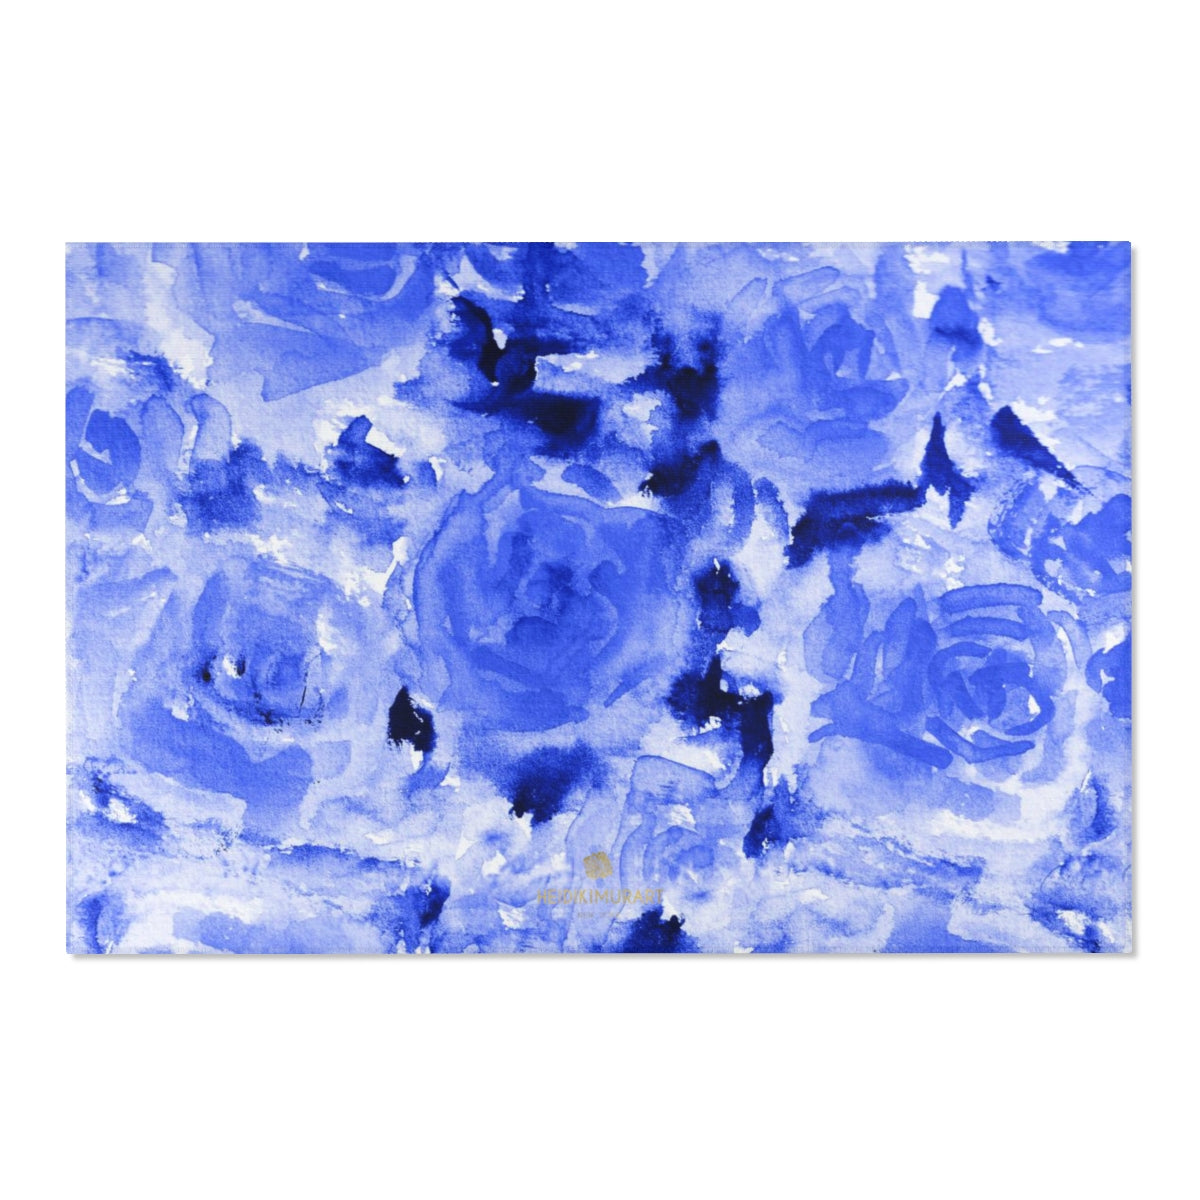 Blue Abstract Rose Floral Print Designer 24x36, 36x60, 48x72 inches Area Rugs - Printed in USA-Area Rug-72" x 48"-Heidi Kimura Art LLC Blue Abstract Rose Rug, Blue Abstract Rose Floral Print Designer 24x36, 36x60, 48x72 inches Machine Washable Area Rugs/ Carpet-Printed in the USA